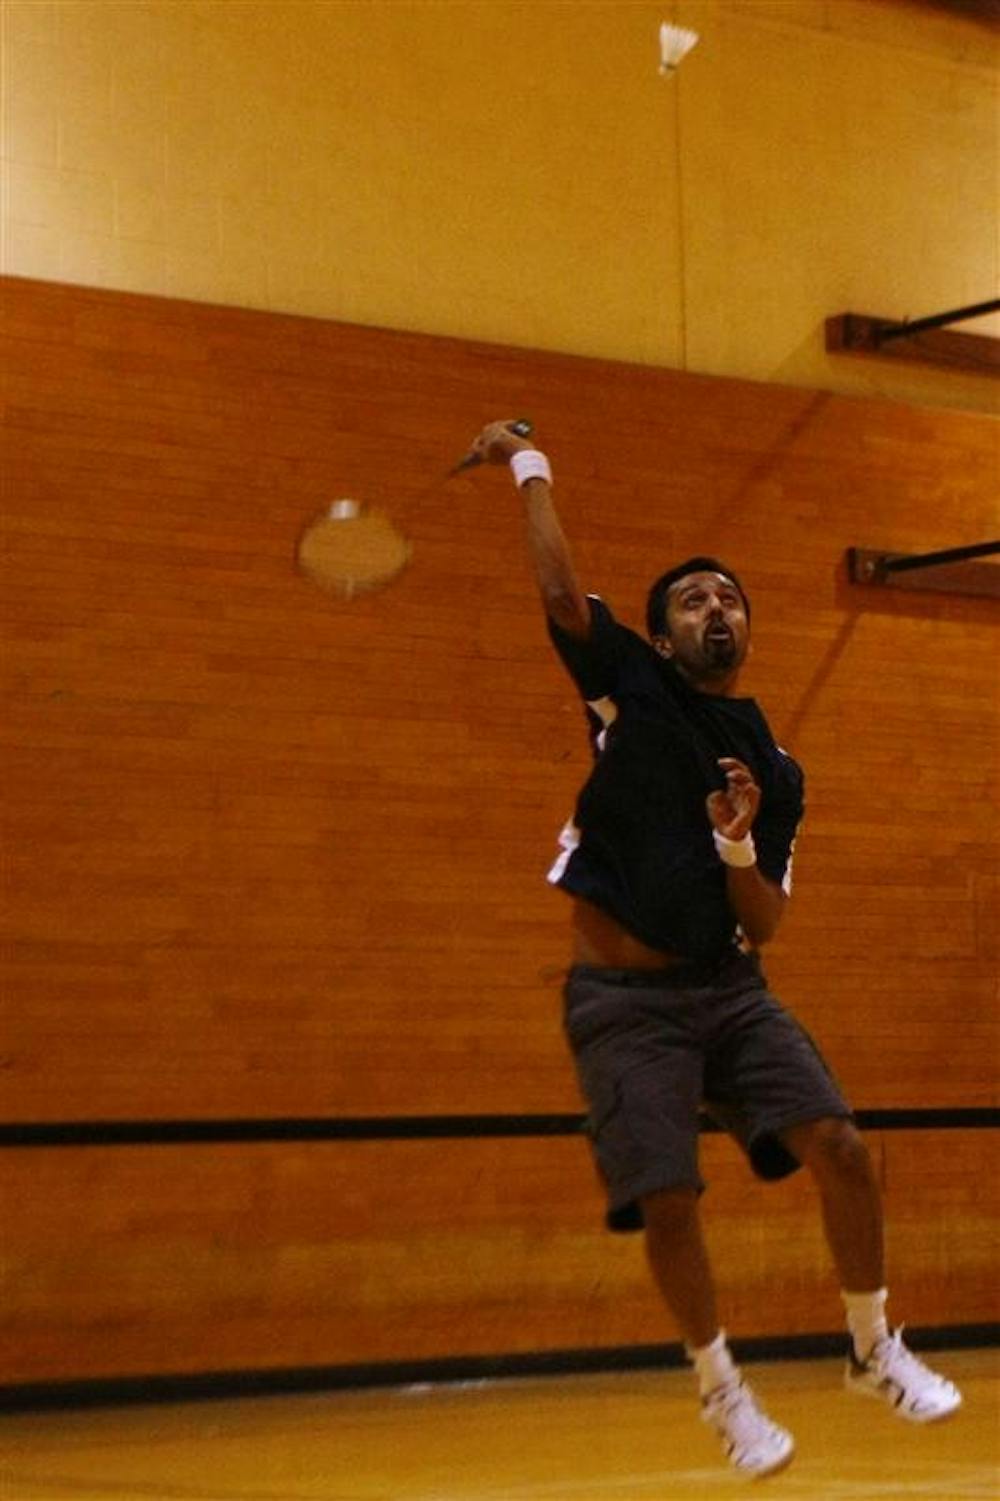 Faculty member Sandeep Chandukala returns the birdie with an overhead shot, while playing in a doubles match against fellow badminton club members during practice on Sunday afternoon at the HPER.